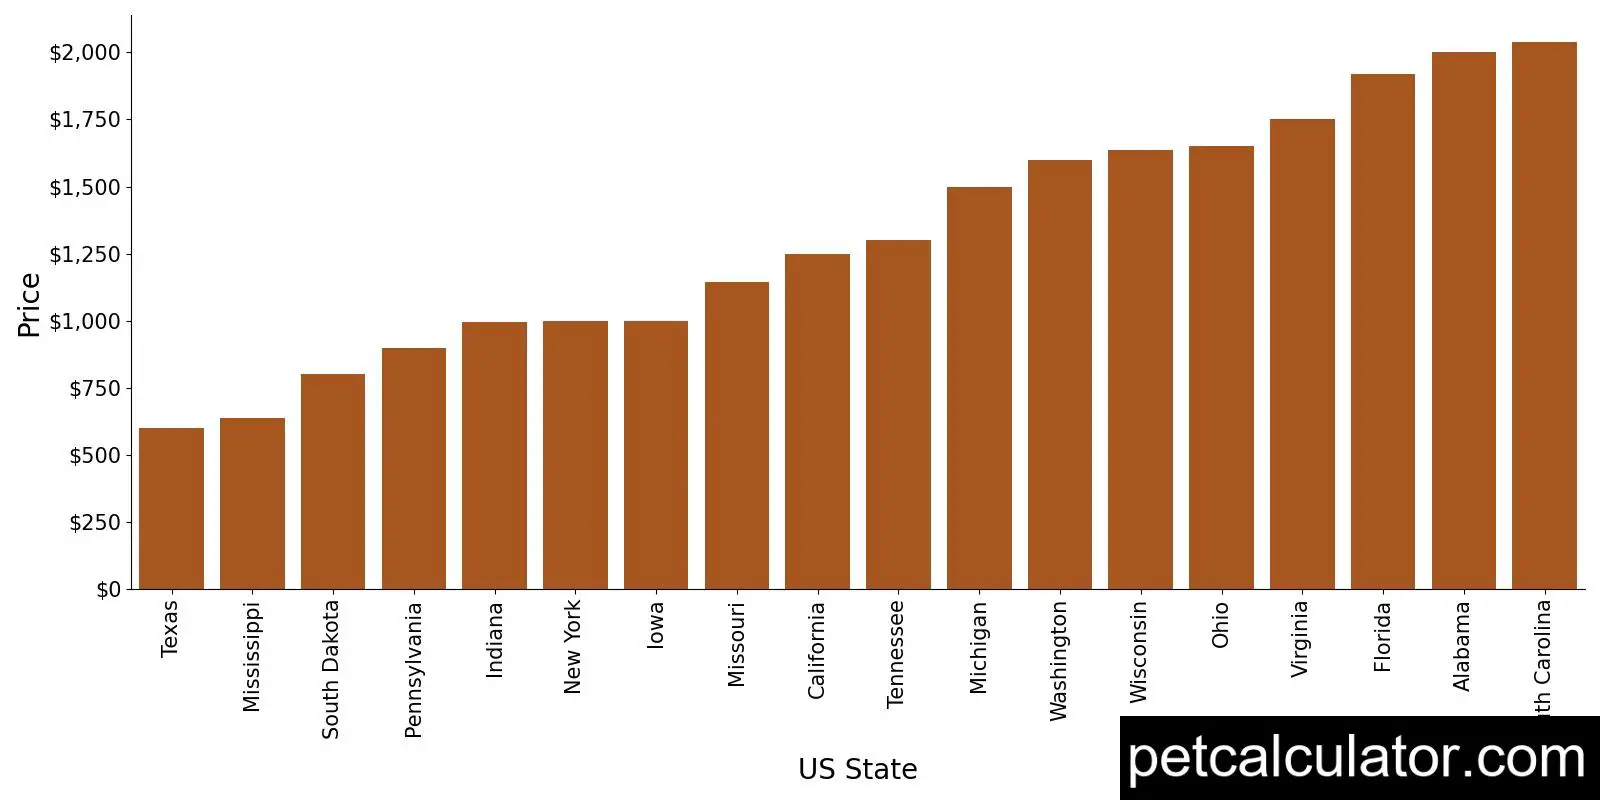 Price of Cockalier by US State 